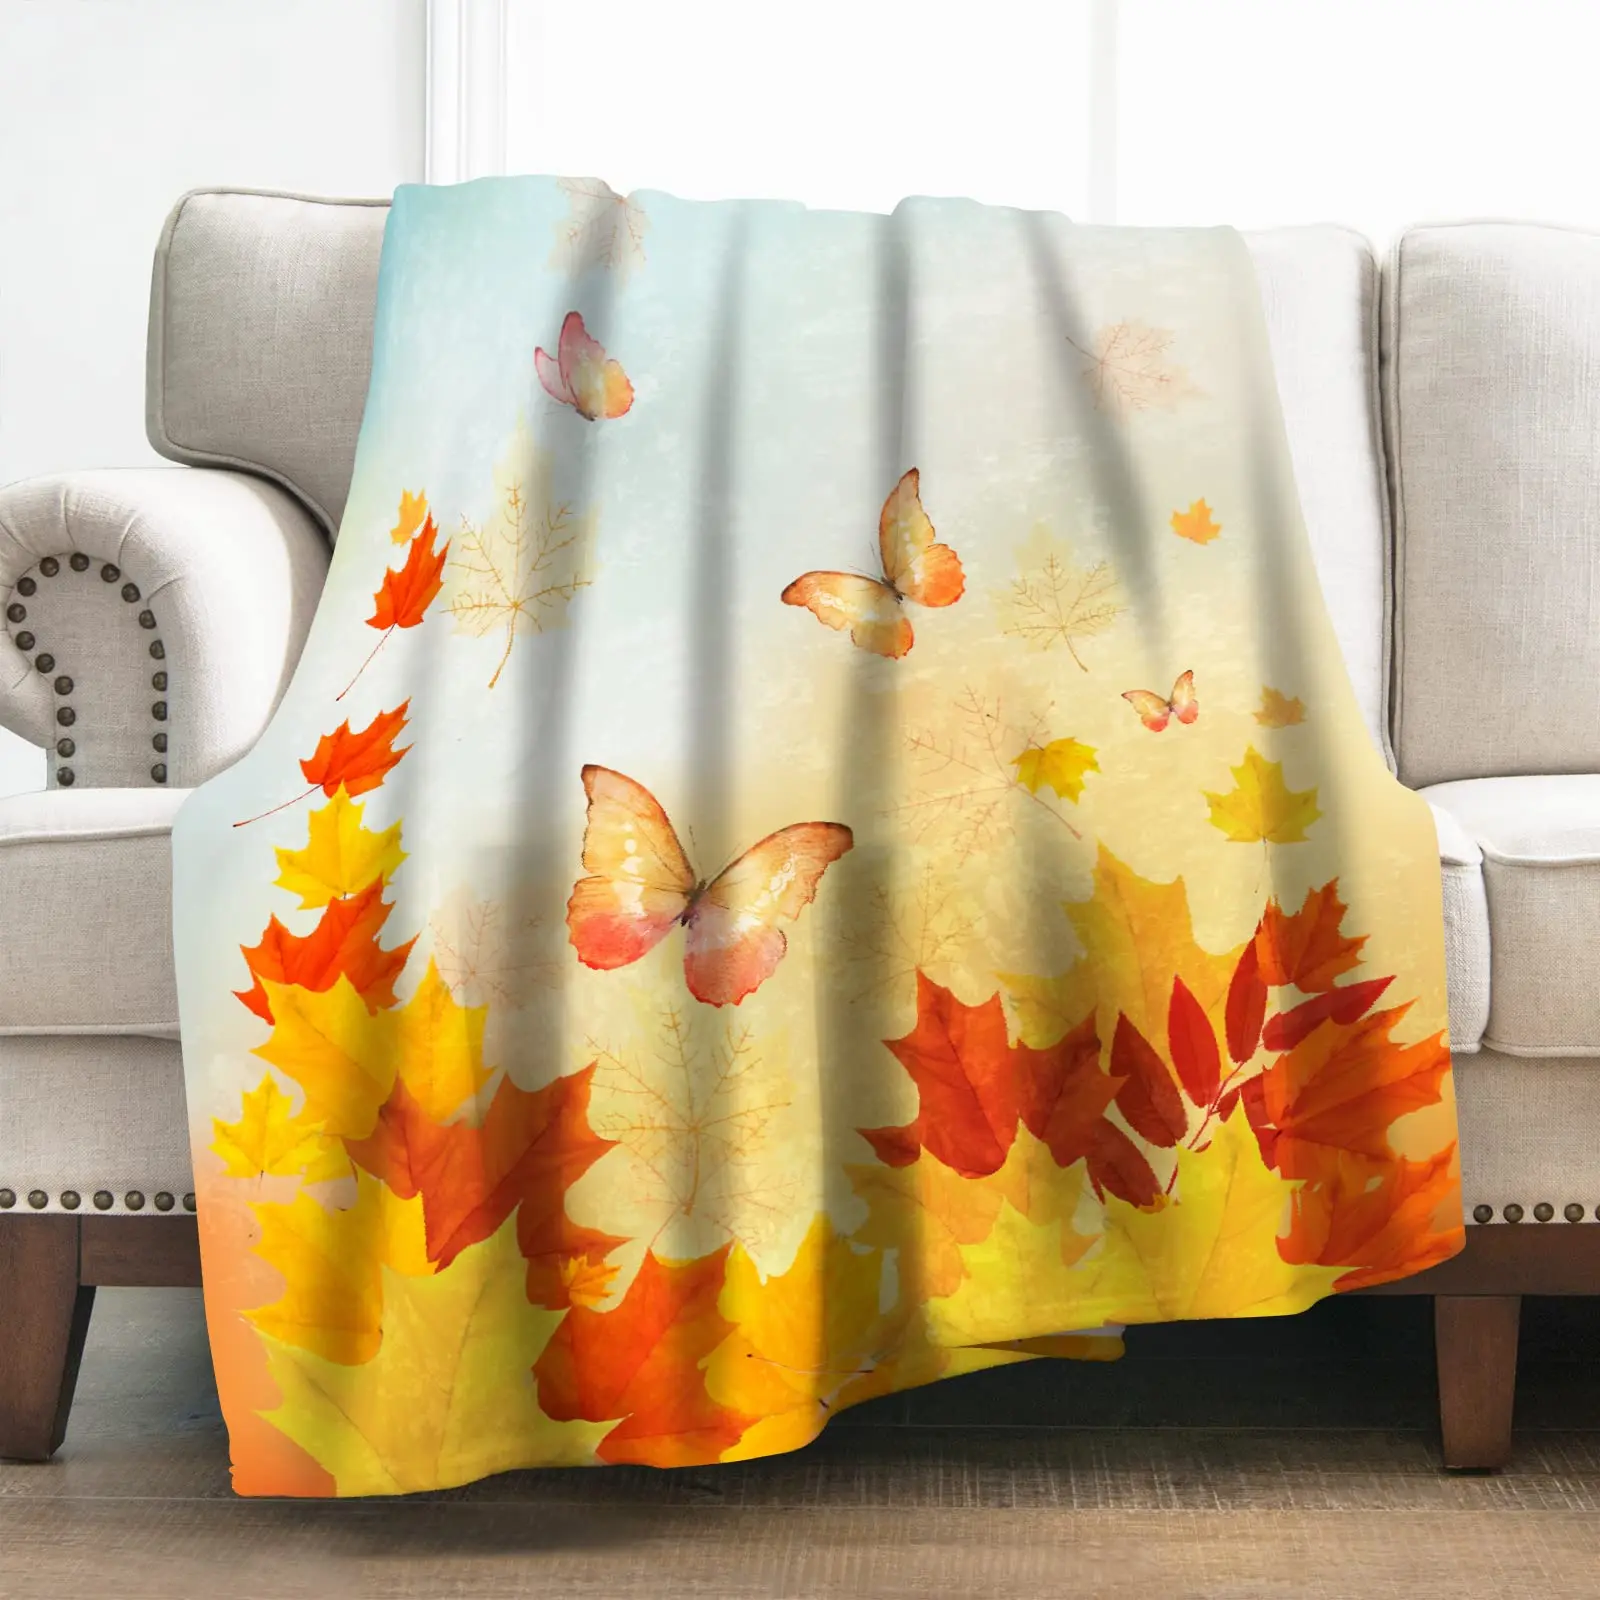 

Maple Leaves Blanket Gifts for Women Girls Boys,Autumn Fall Maple Leaf Thanksgiving Day Halloween Soft Cozy Smooth Throw Blanket